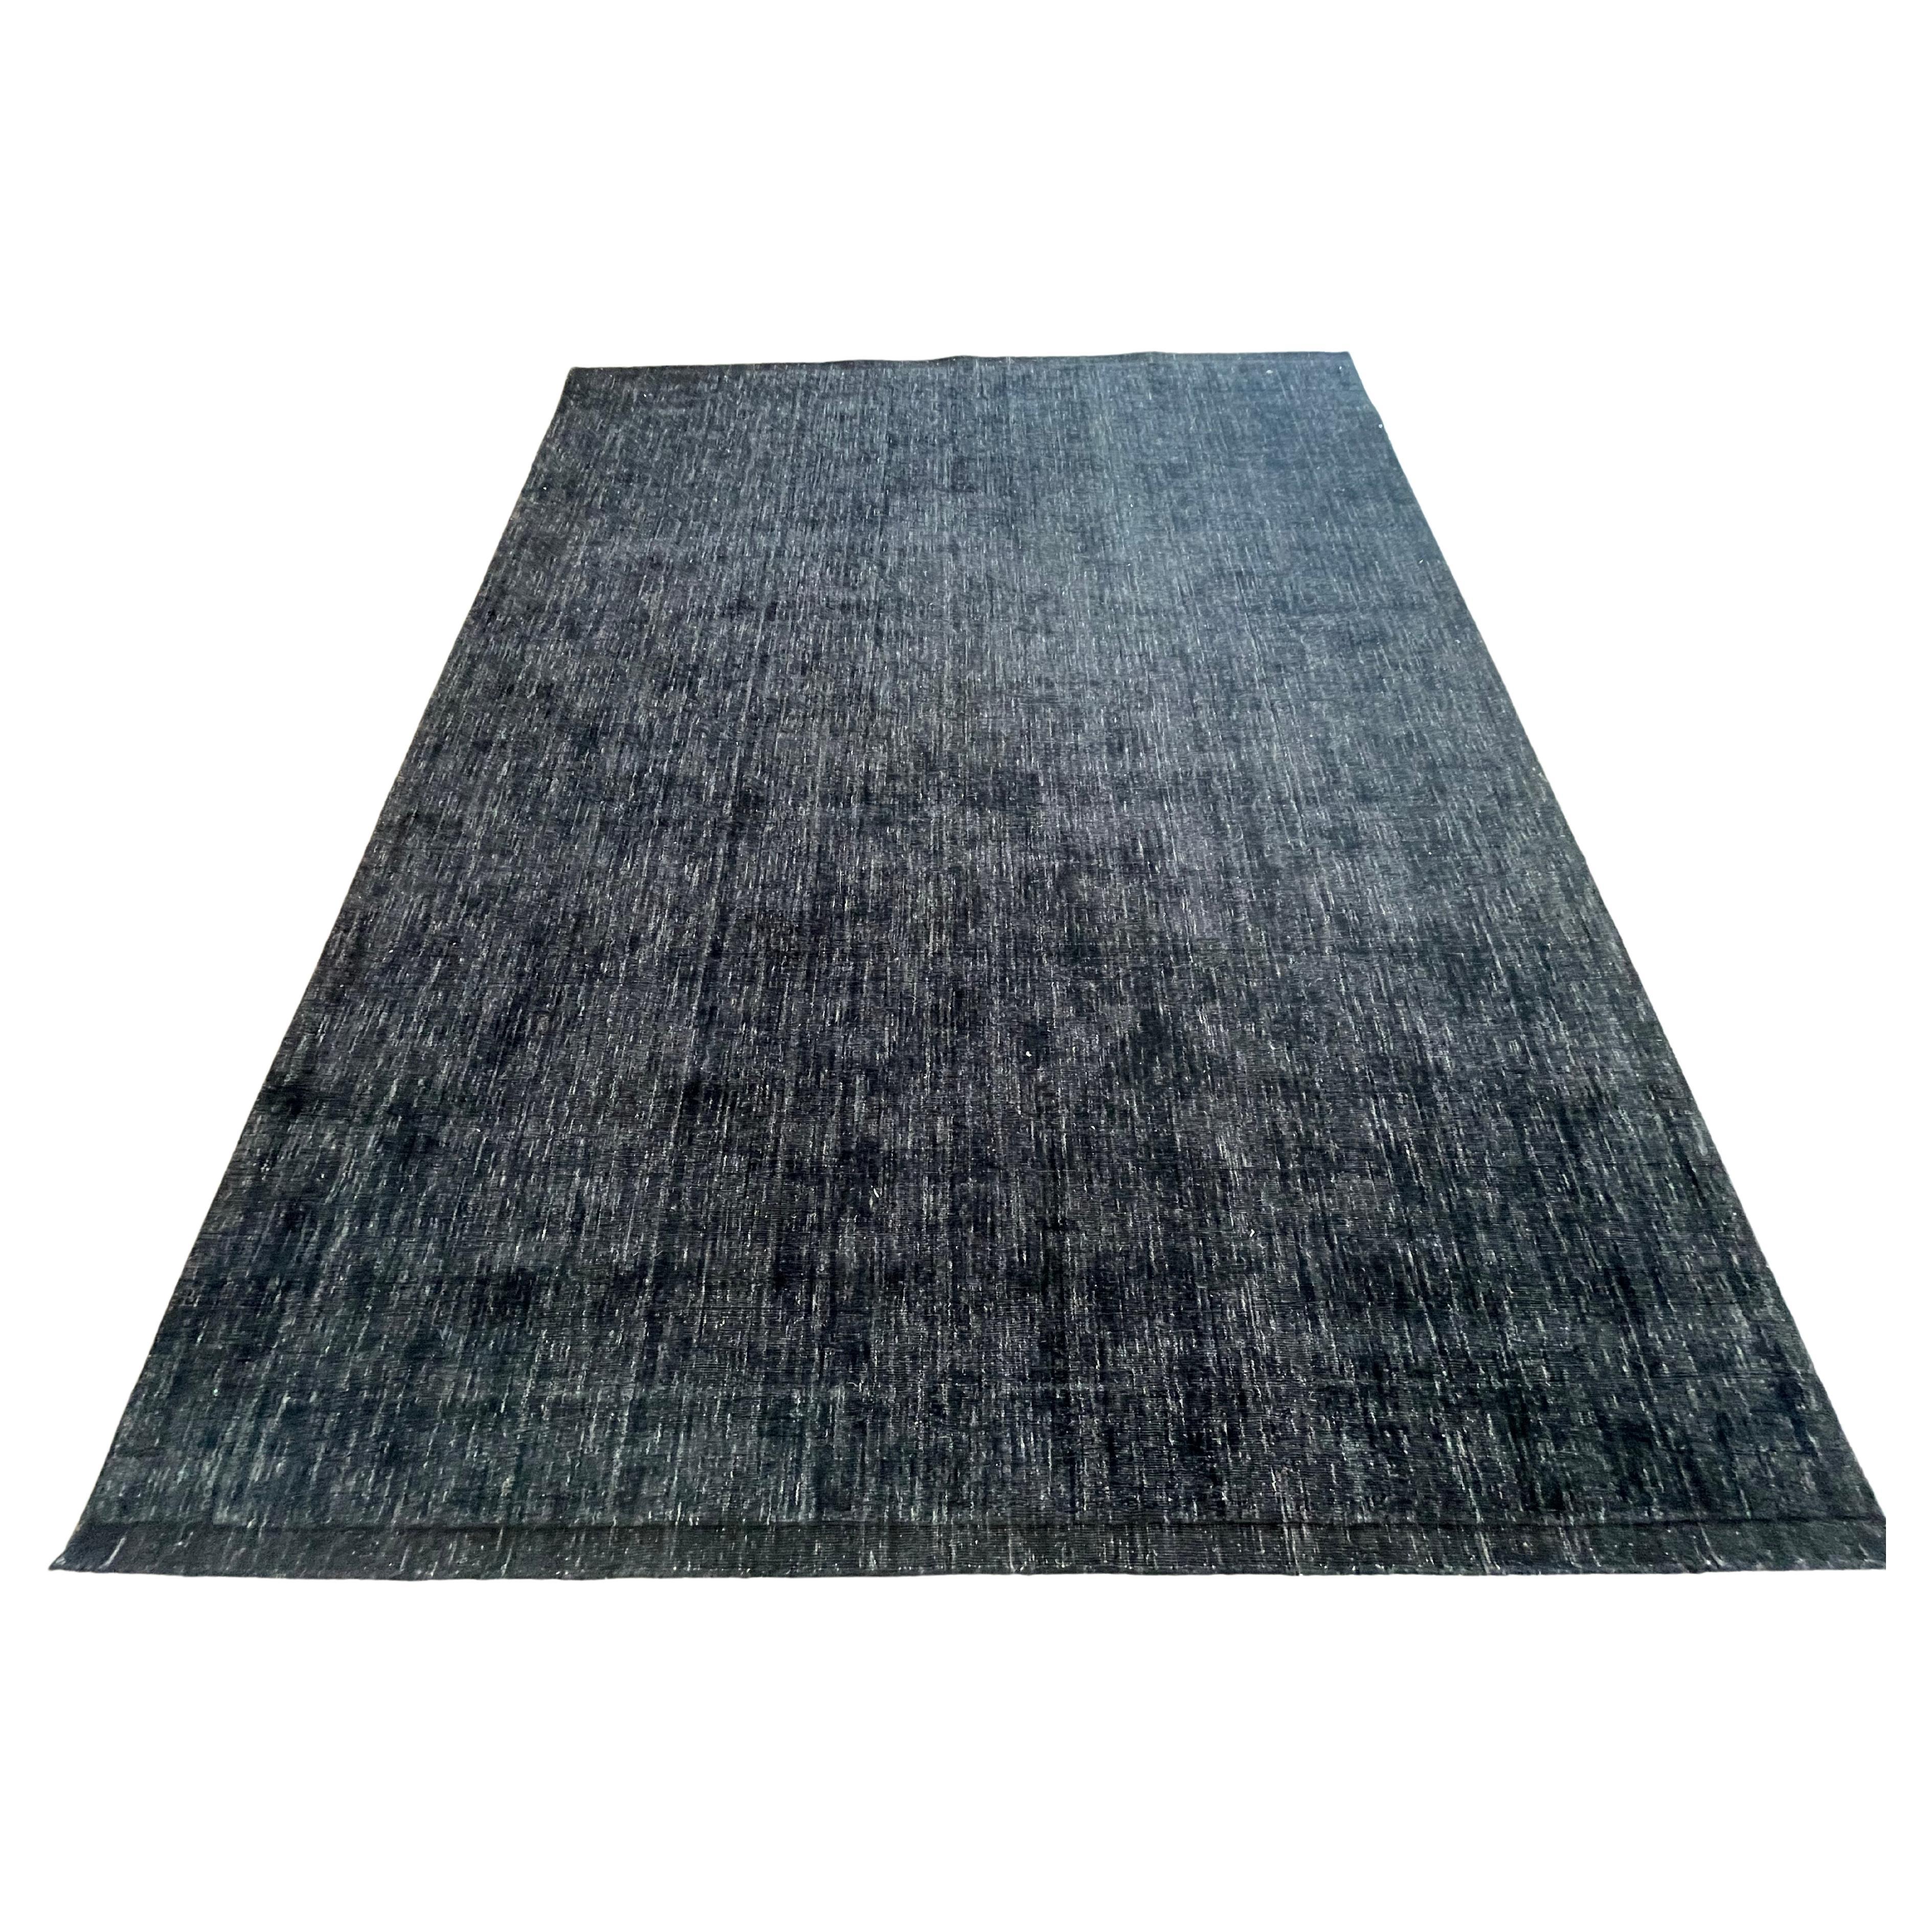 Loop Plain Black and White Design Indian Area Rug For Sale